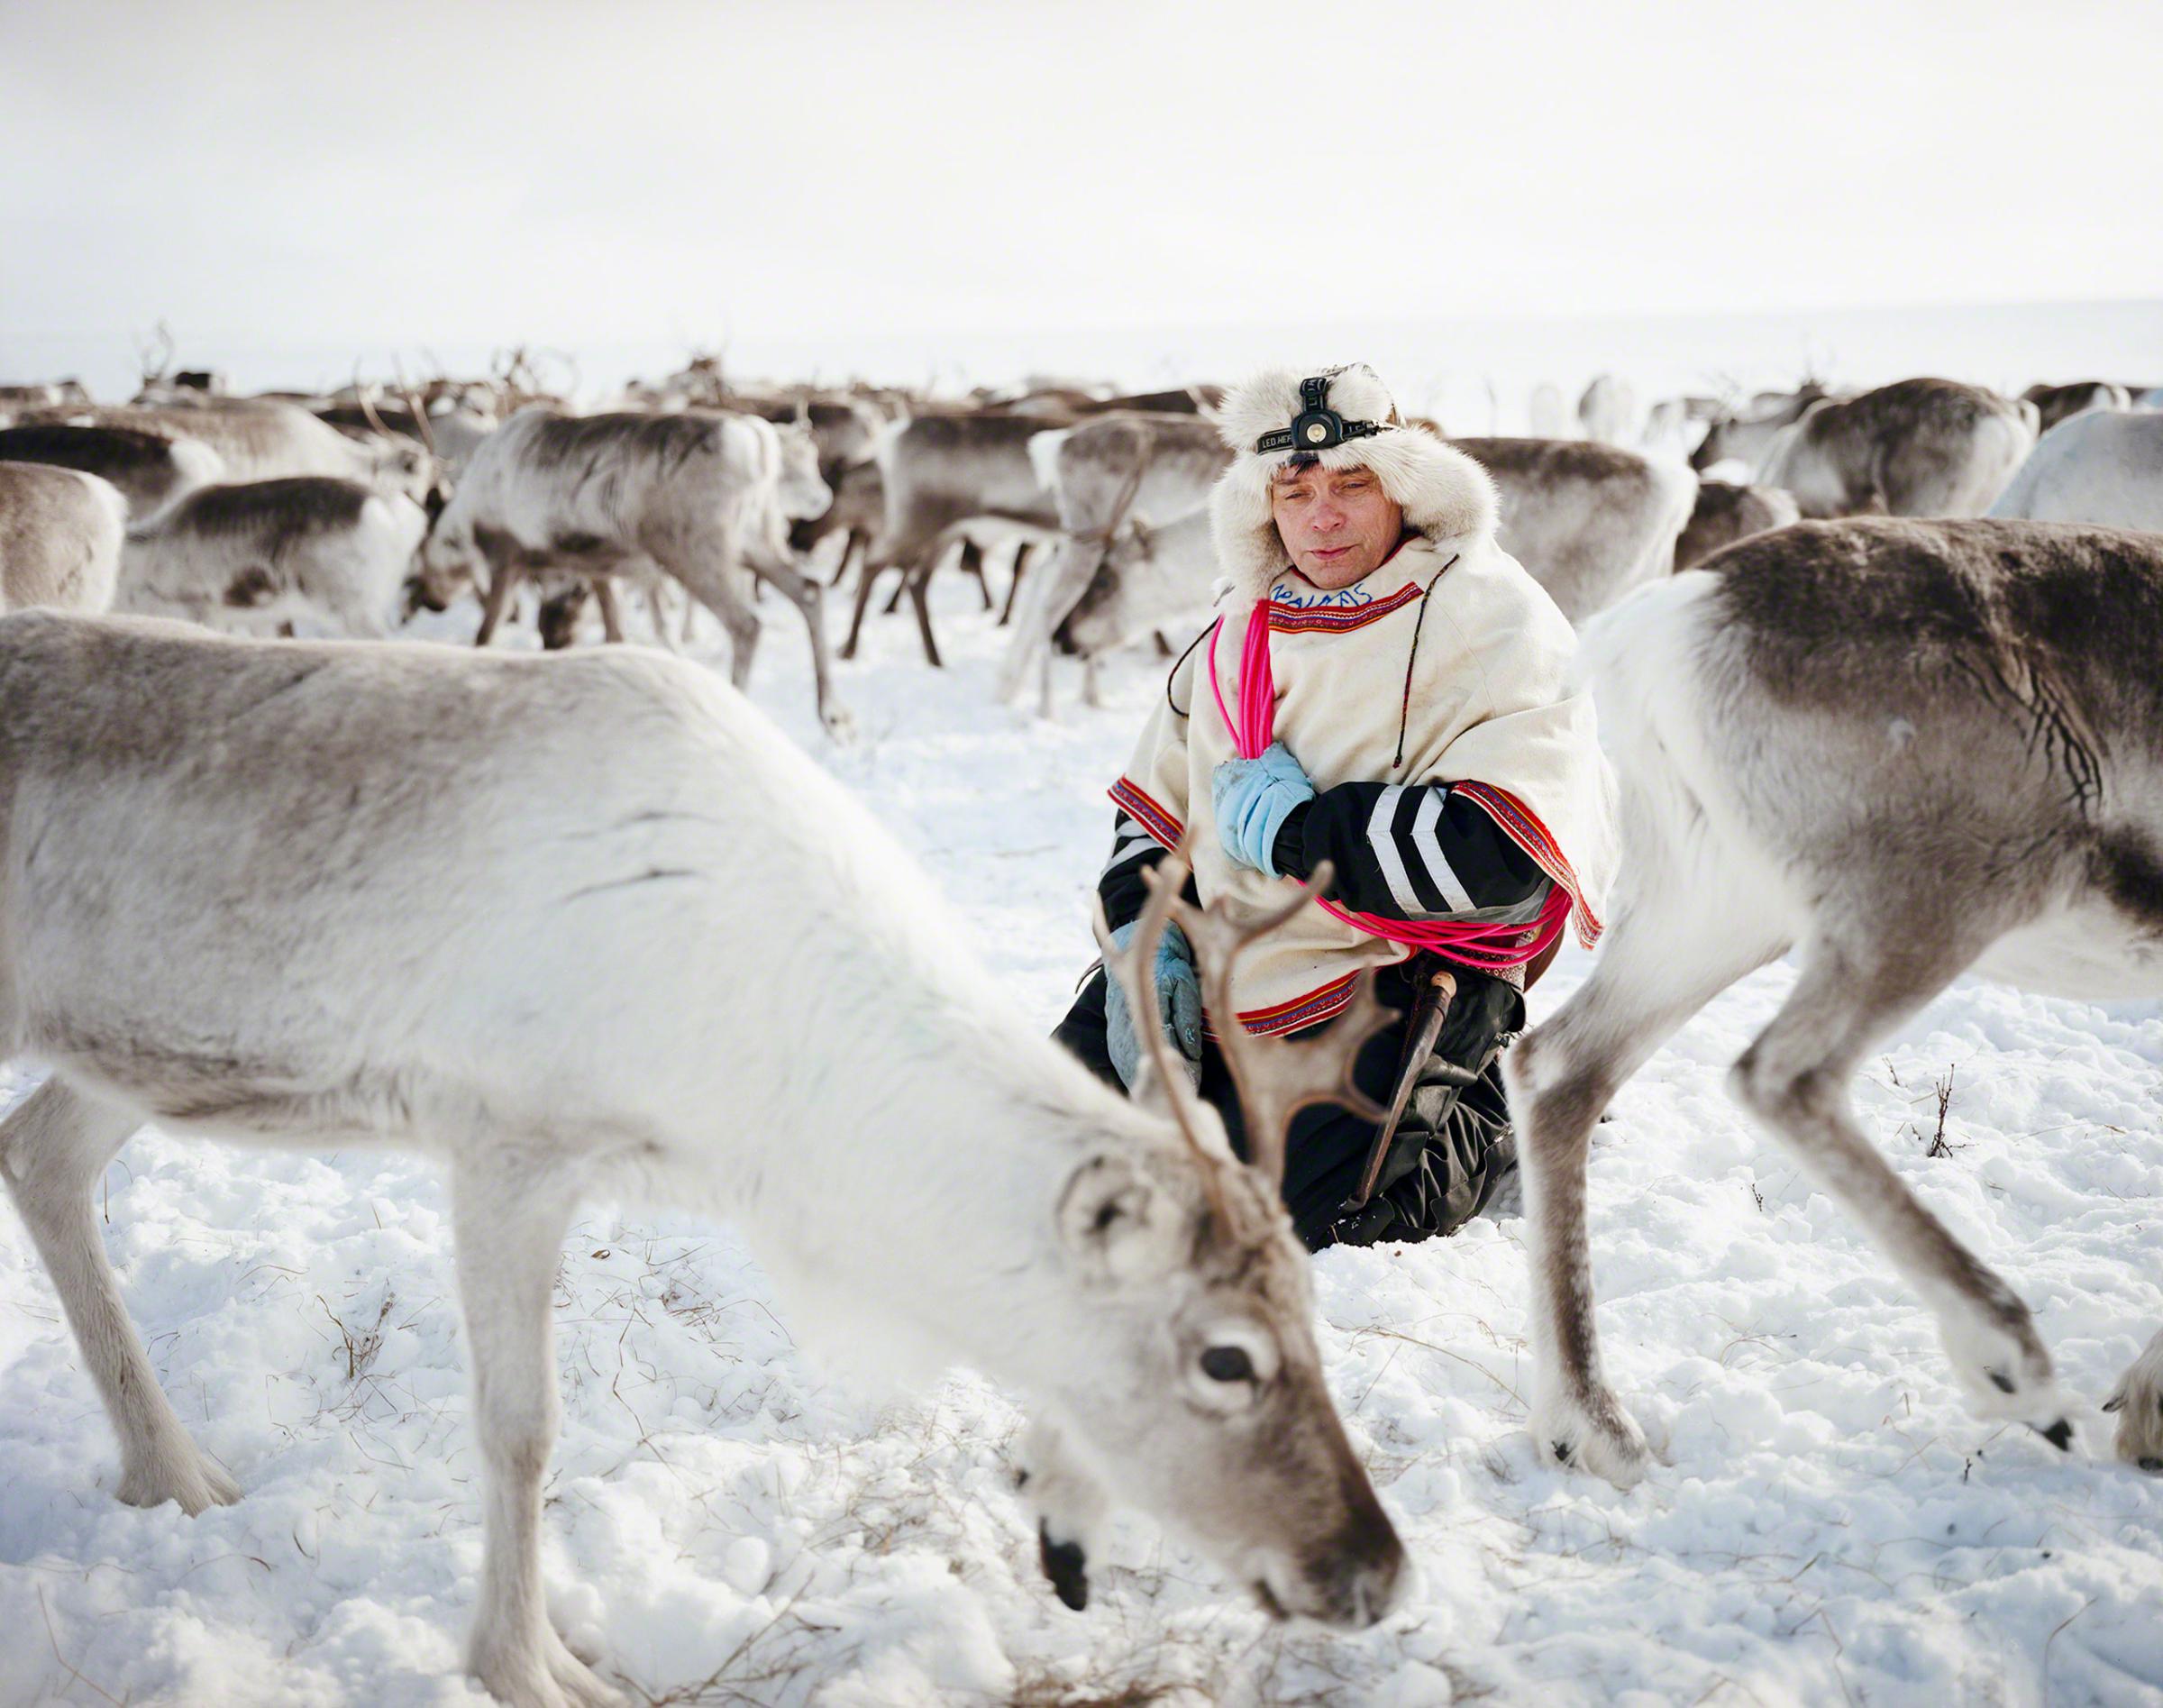 Reindeer can spook suddenly, so Nils Peder kneels calmly in the midst of the herd on which his livelihood depends. He holds a lasso color-coded to indicate the temperature and season in which it works best. As he watches the animals, Nils Peder is yoiking, chanting a throaty, traditional Sami song evoking his wife, Ingrid. The Lutheran pastors who converted the Sami forbade yoiking, calling it devil's music. Nils Peder learned it from his grandparents and has taught it to his children.